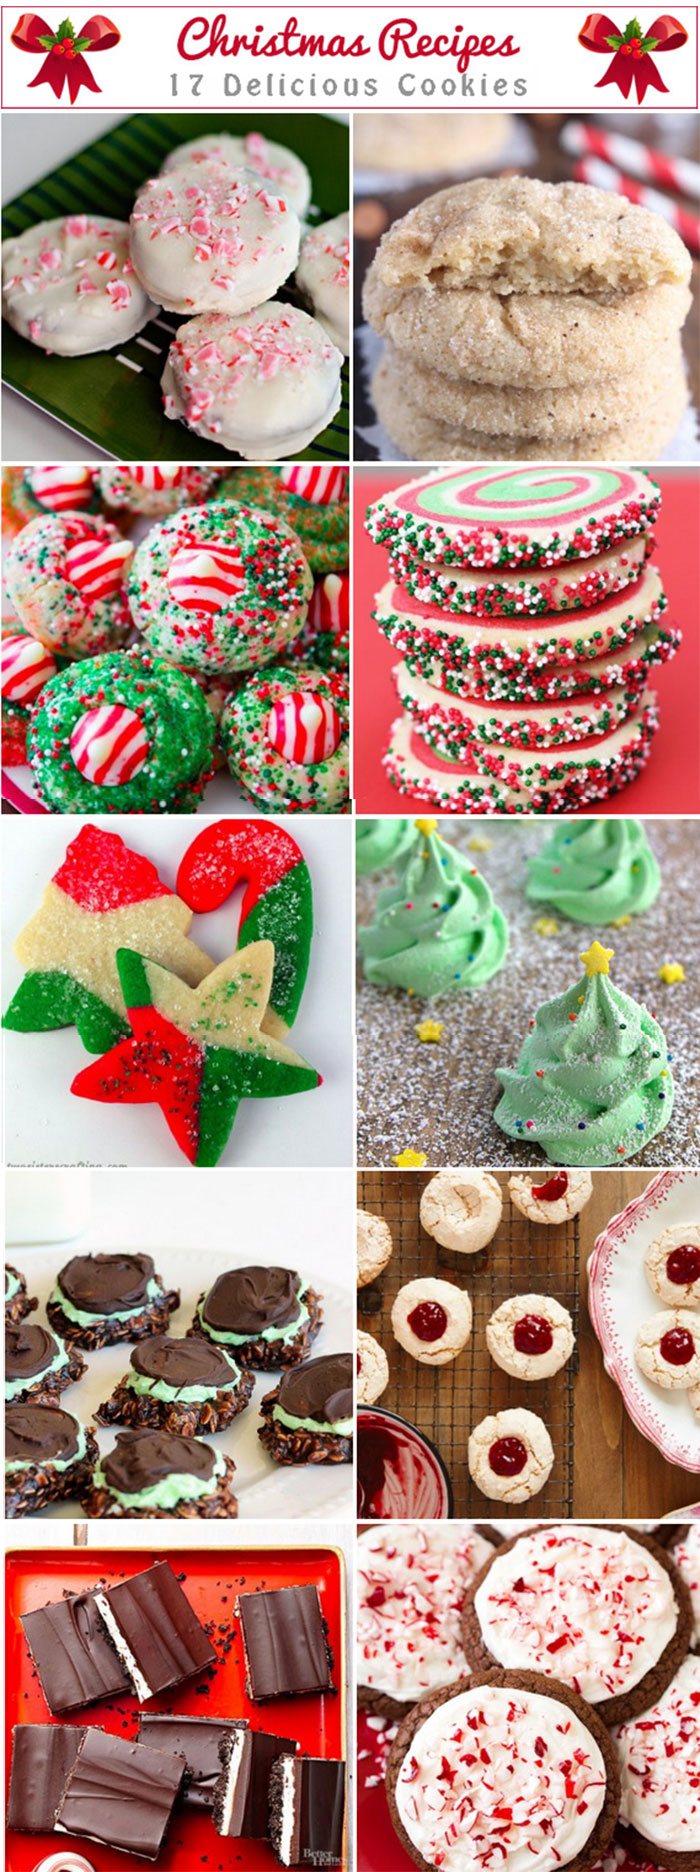 17 Delicious Christmas Cookie Recipes You Must Try These Holidays